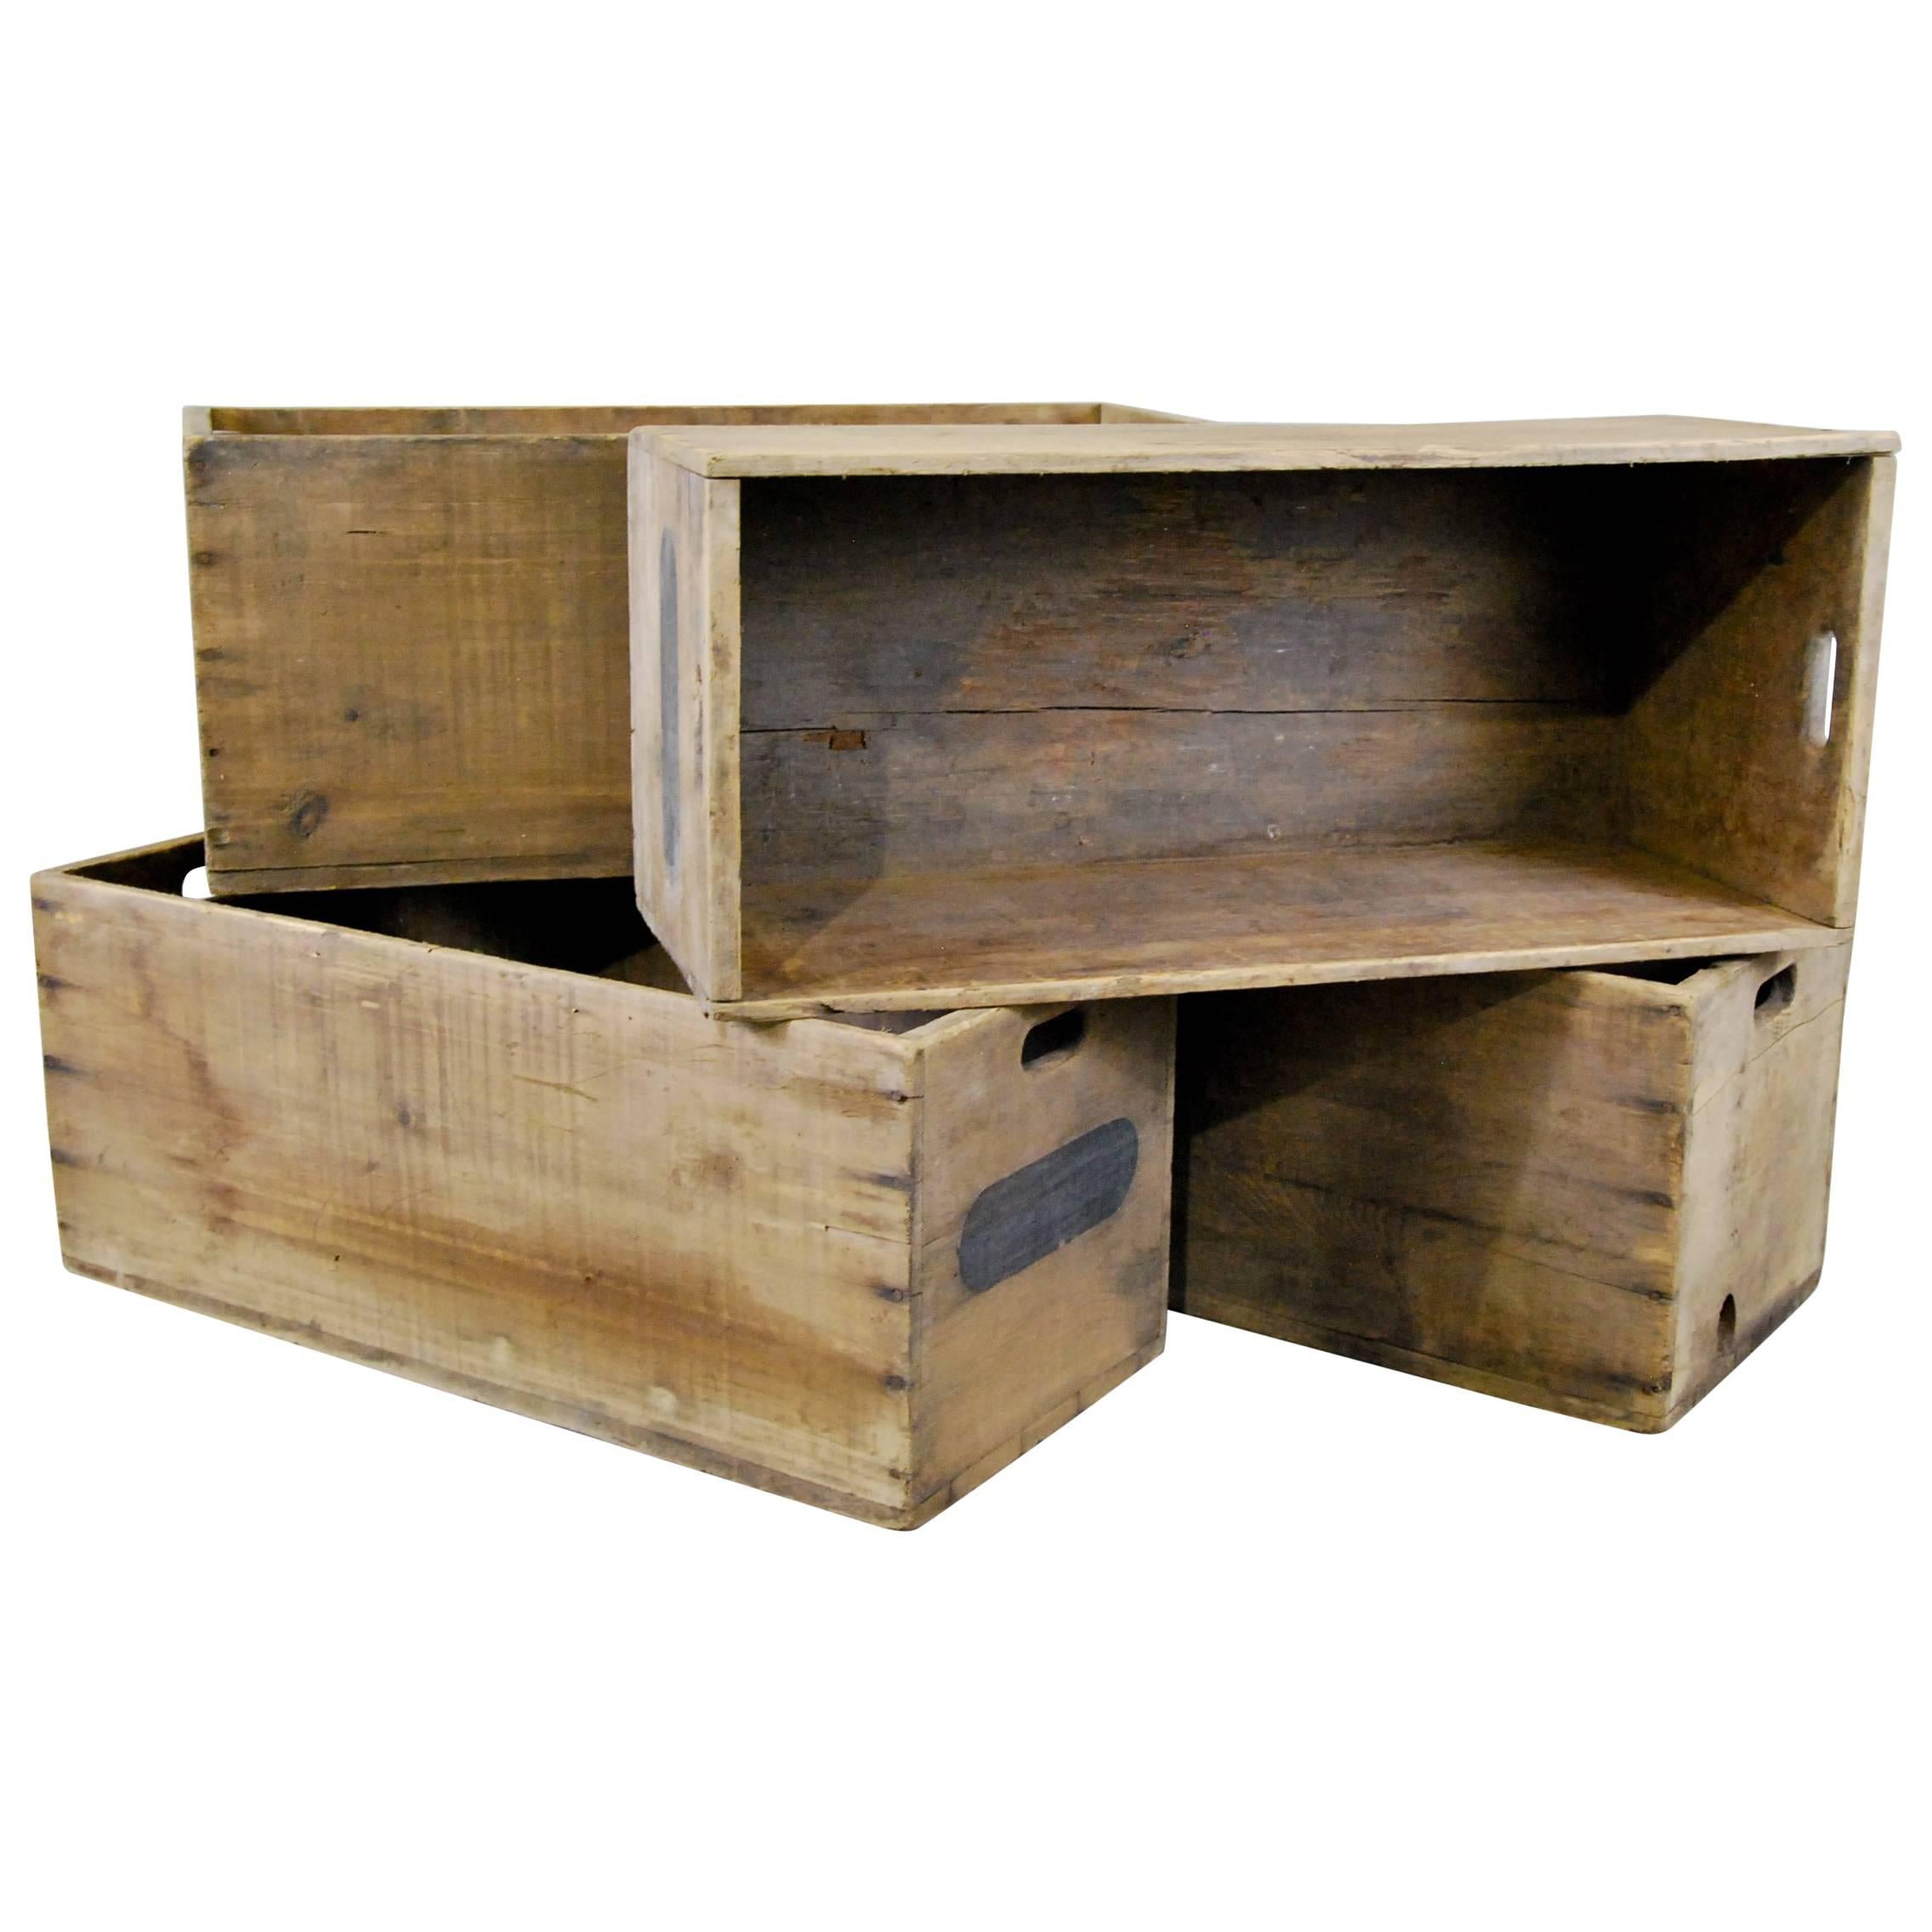 19th Century Wooden Bins from an Old Mill